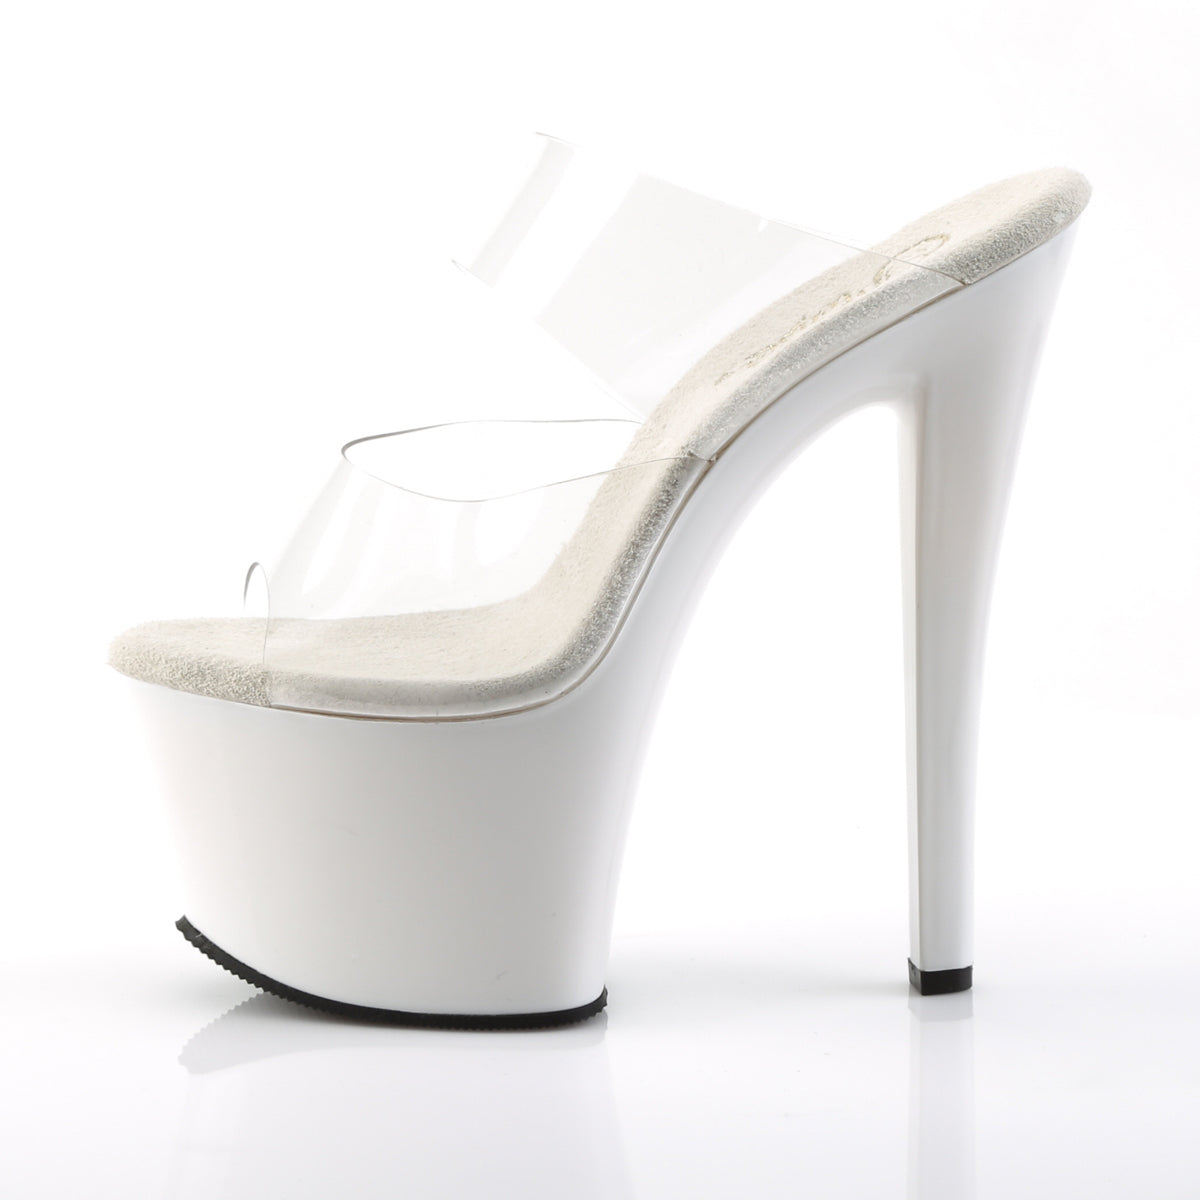 SKY-302 7" Heel Clear and White Pole Dancing Platforms-Pleaser- Sexy Shoes Pole Dance Heels